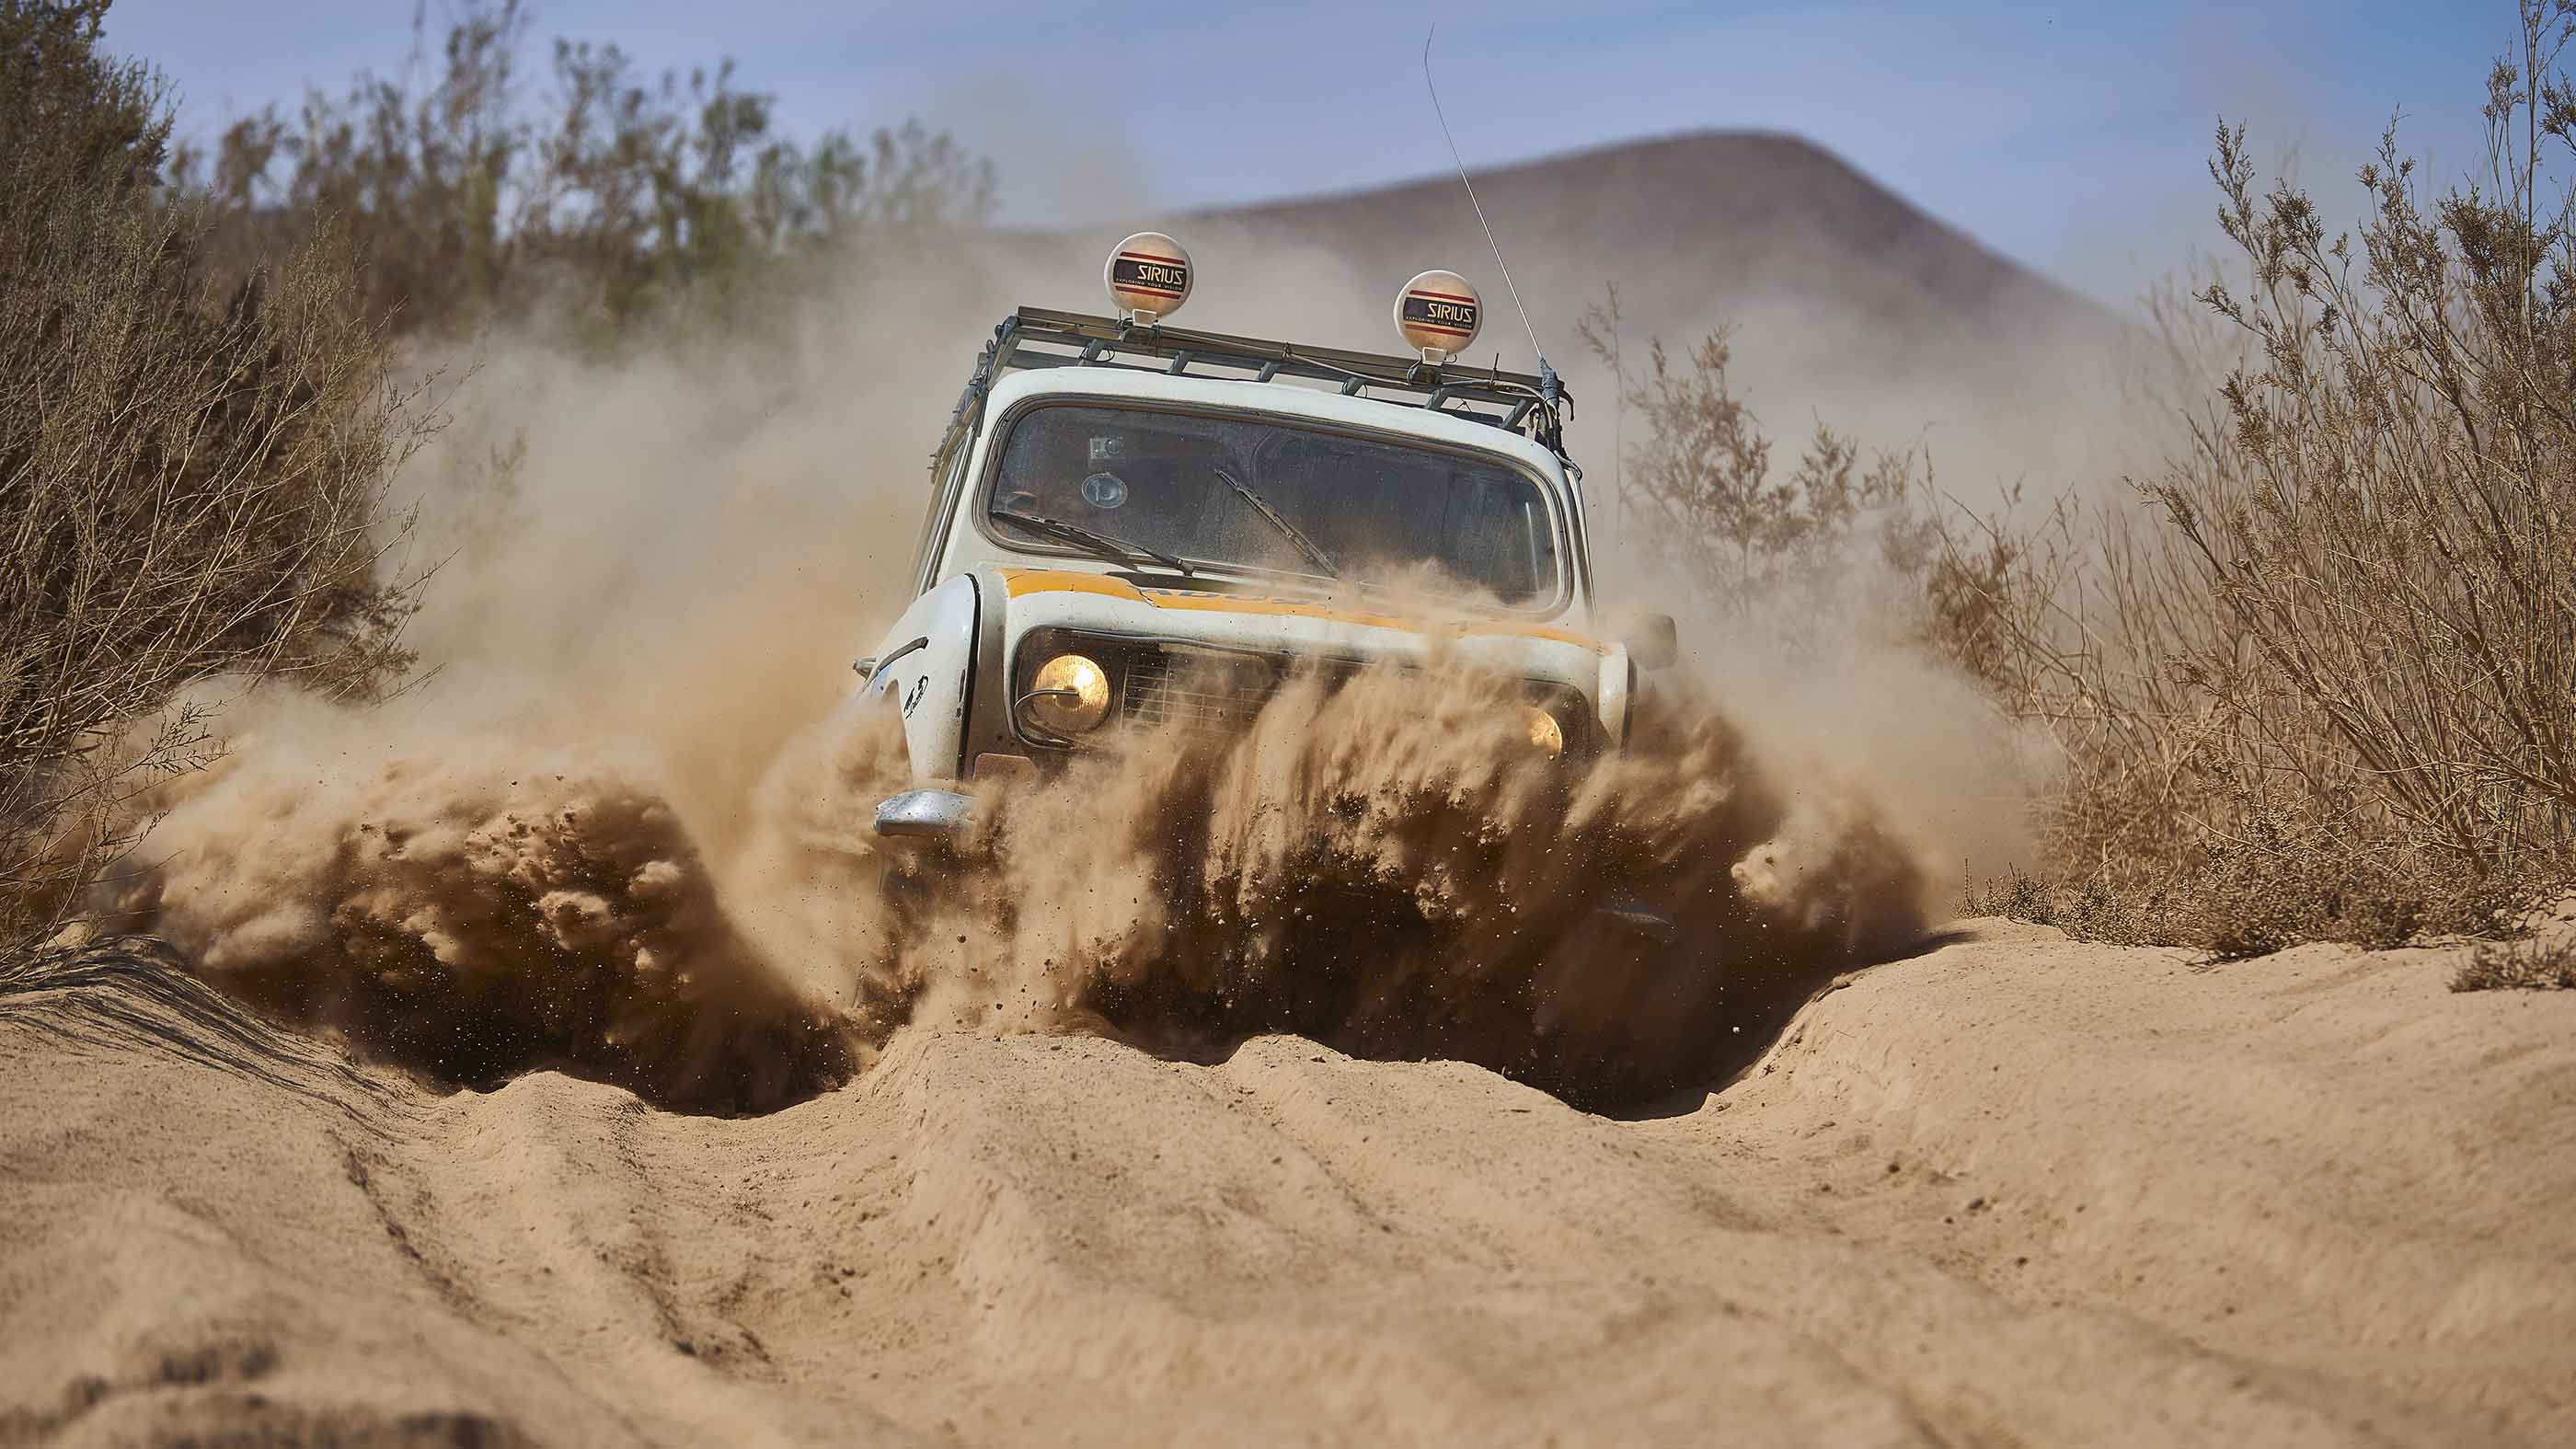 A Renault 4 in a sandy pass in Morocco